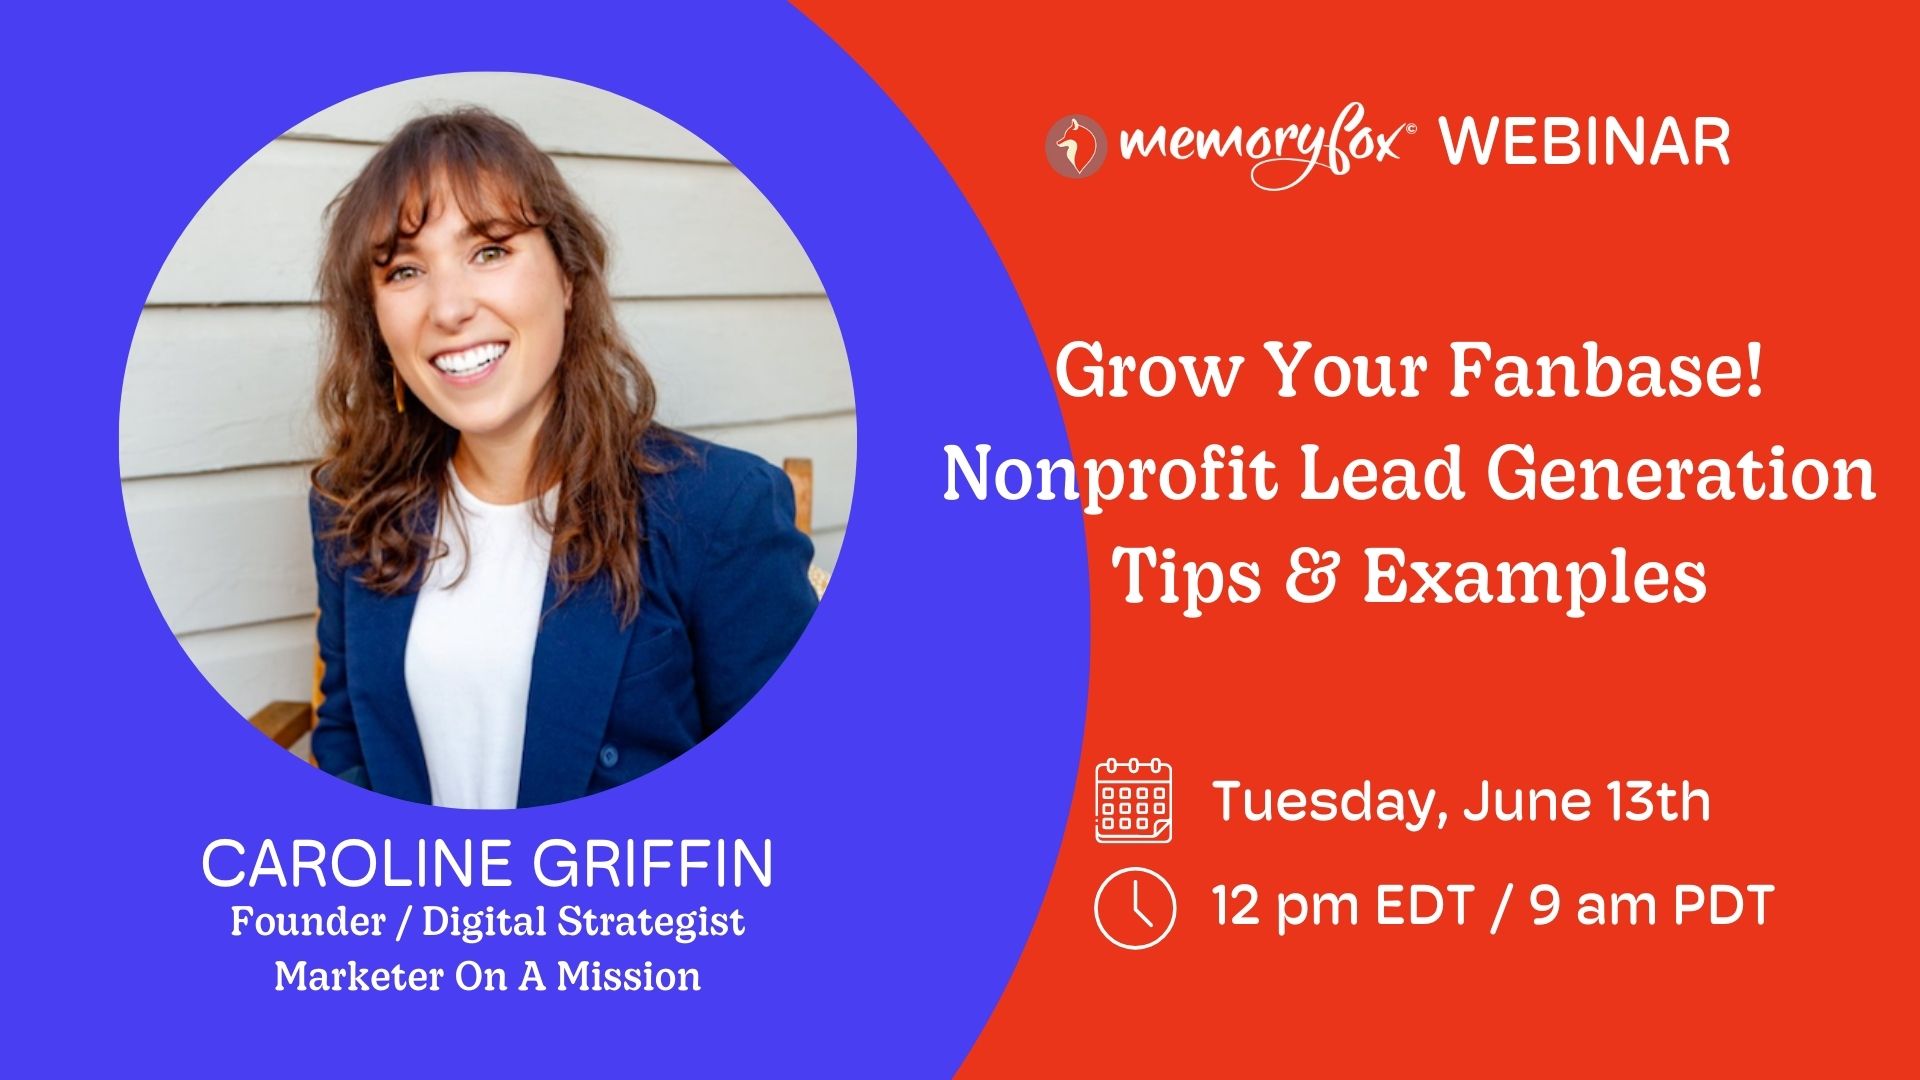 Grow Your Fanbase! Nonprofit Lead Generation Tips & Examples